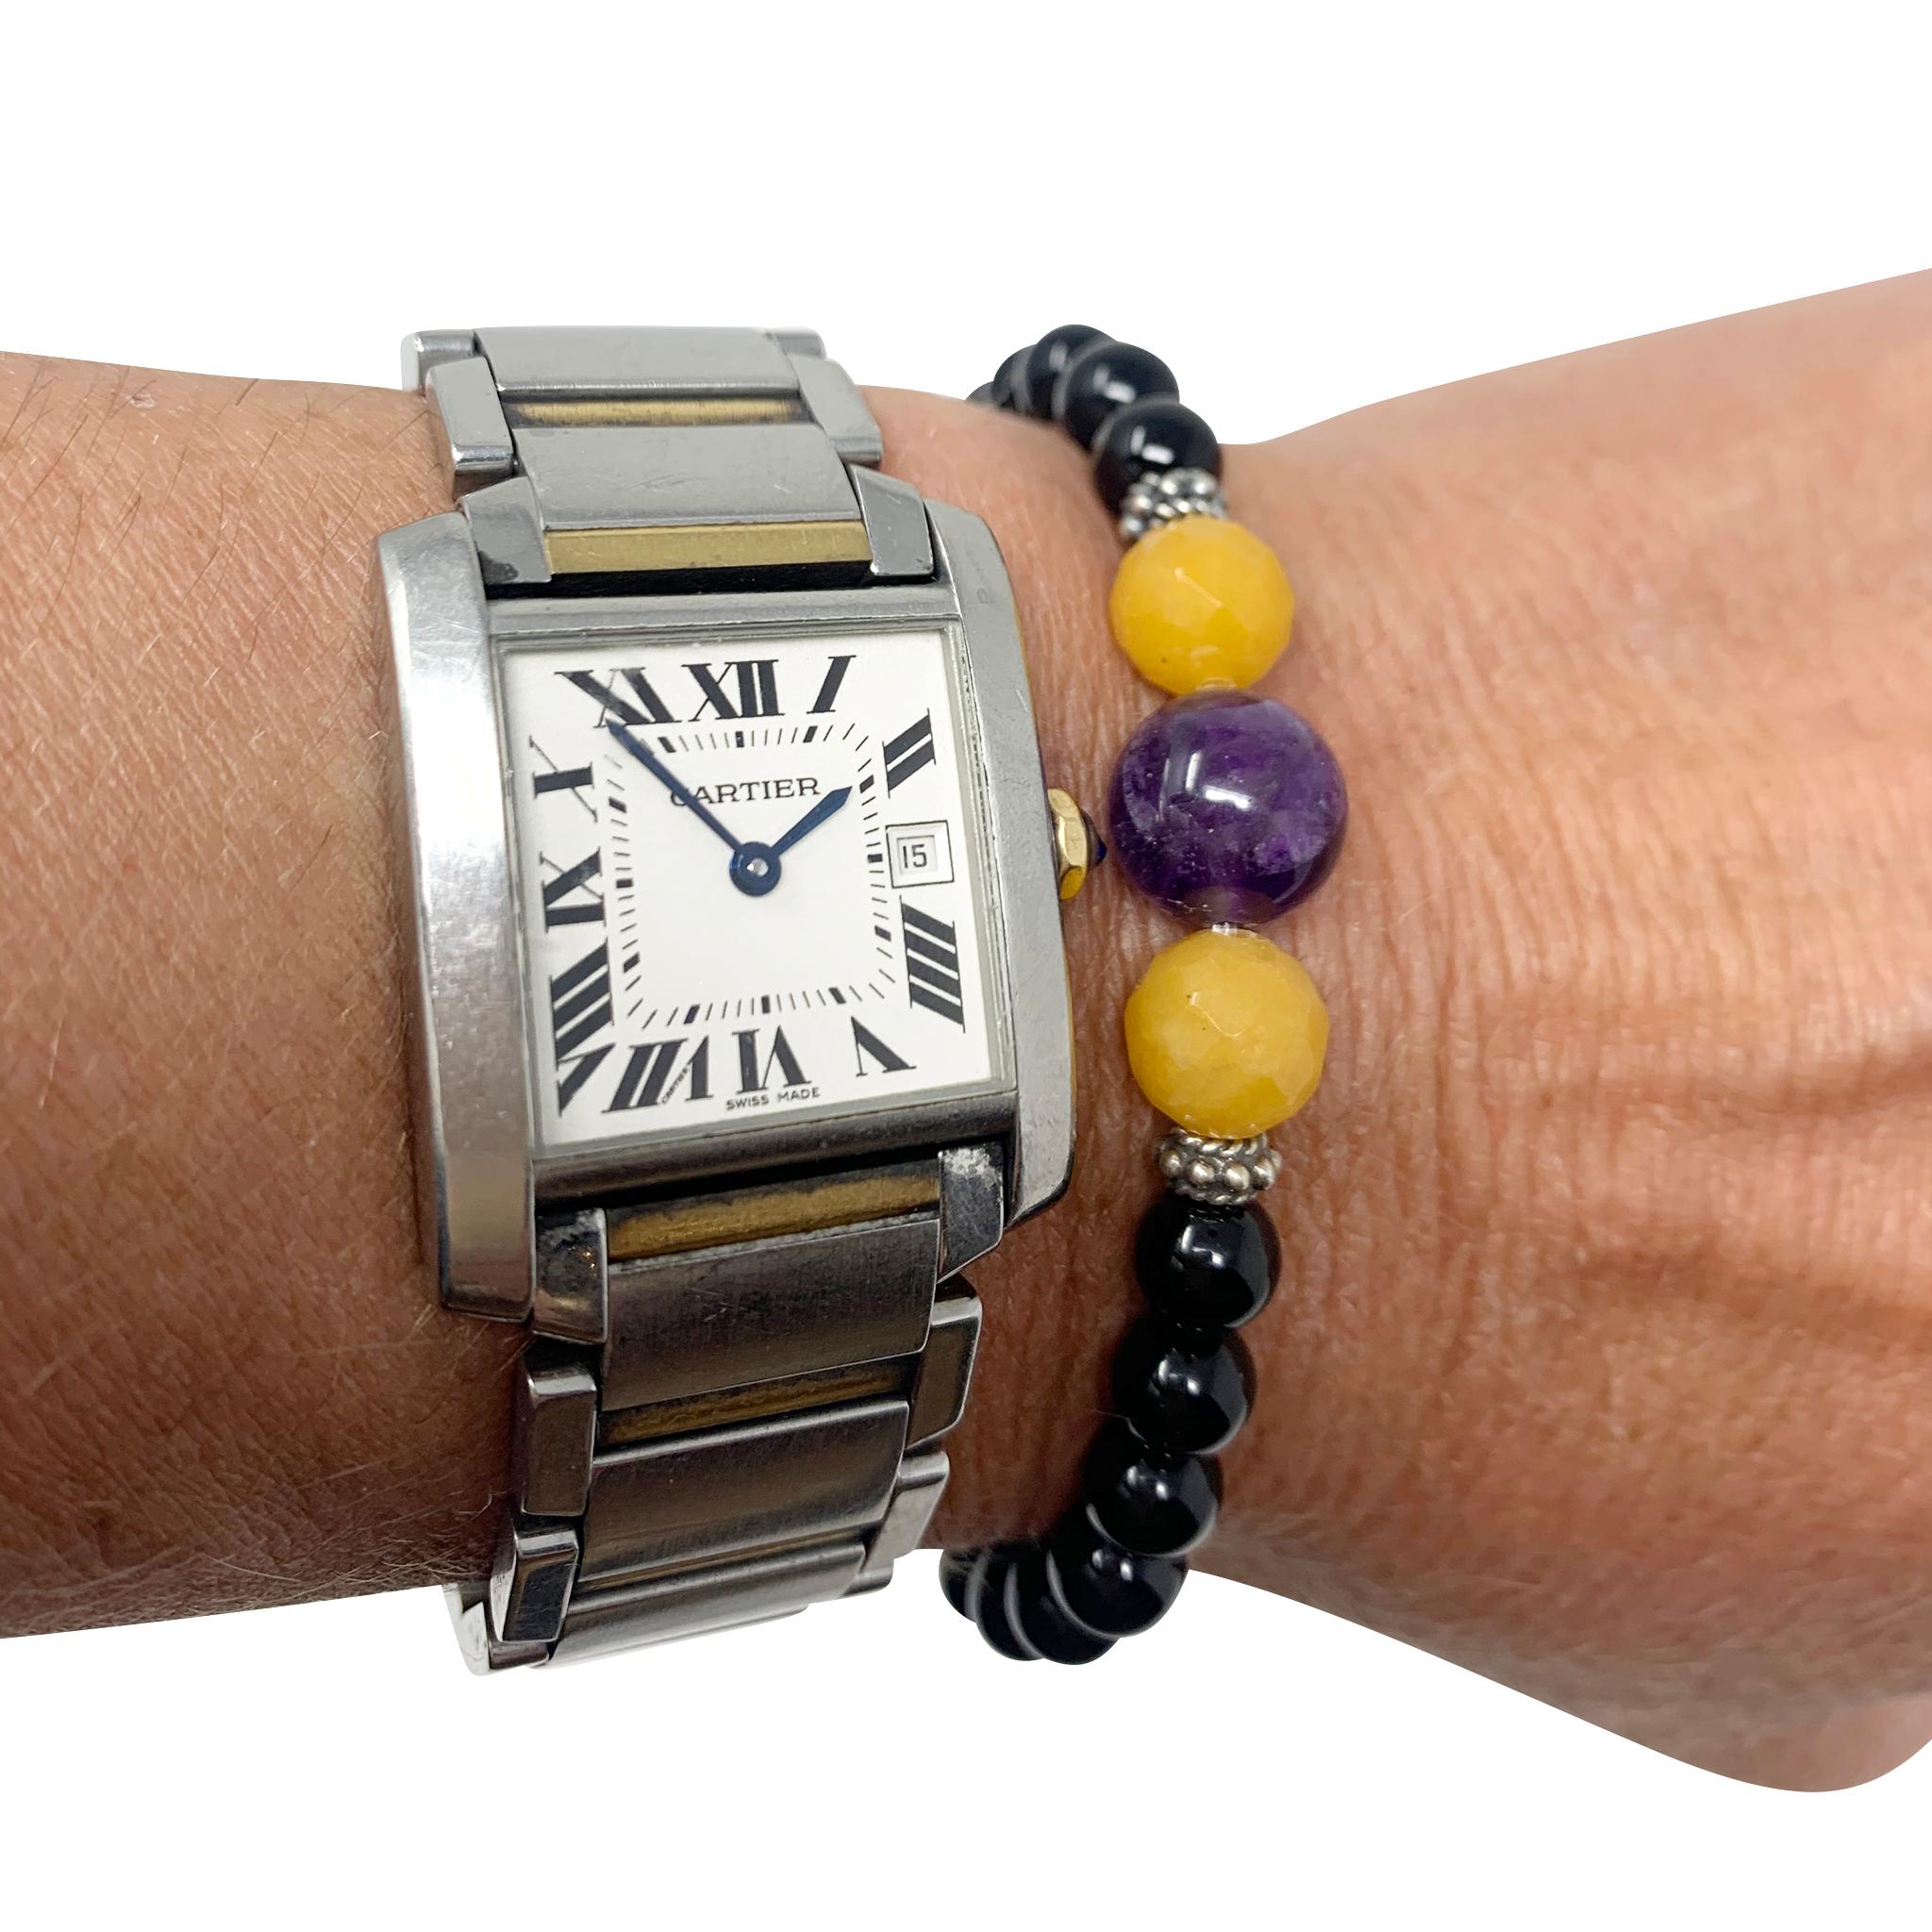 In celebration of the 2020 NBA Champions; LA Lakers, a perfect bracelet for Laker Nation.  A tribute to Kobe Bryant's career and induction to the Hall of Fame.  It is comprised of purple amethyst, yellow jade, and black agate. 
Designed and handmade